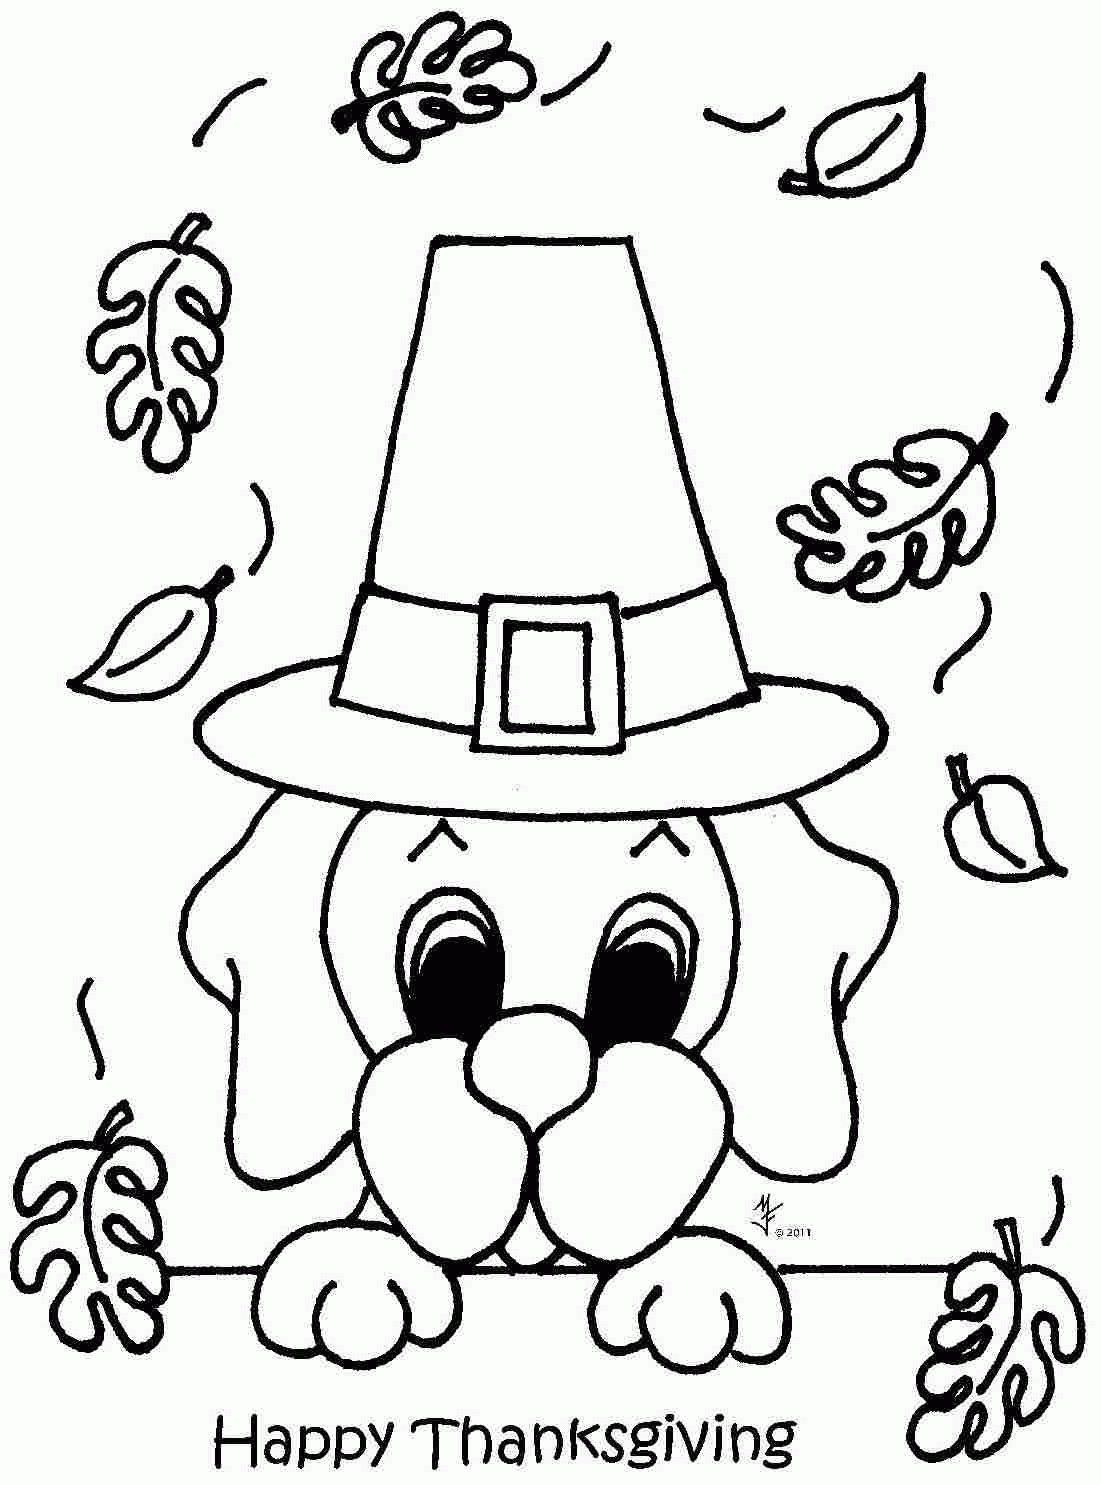 Disney Free Thanksgiving Coloring Pages - Coloring Home